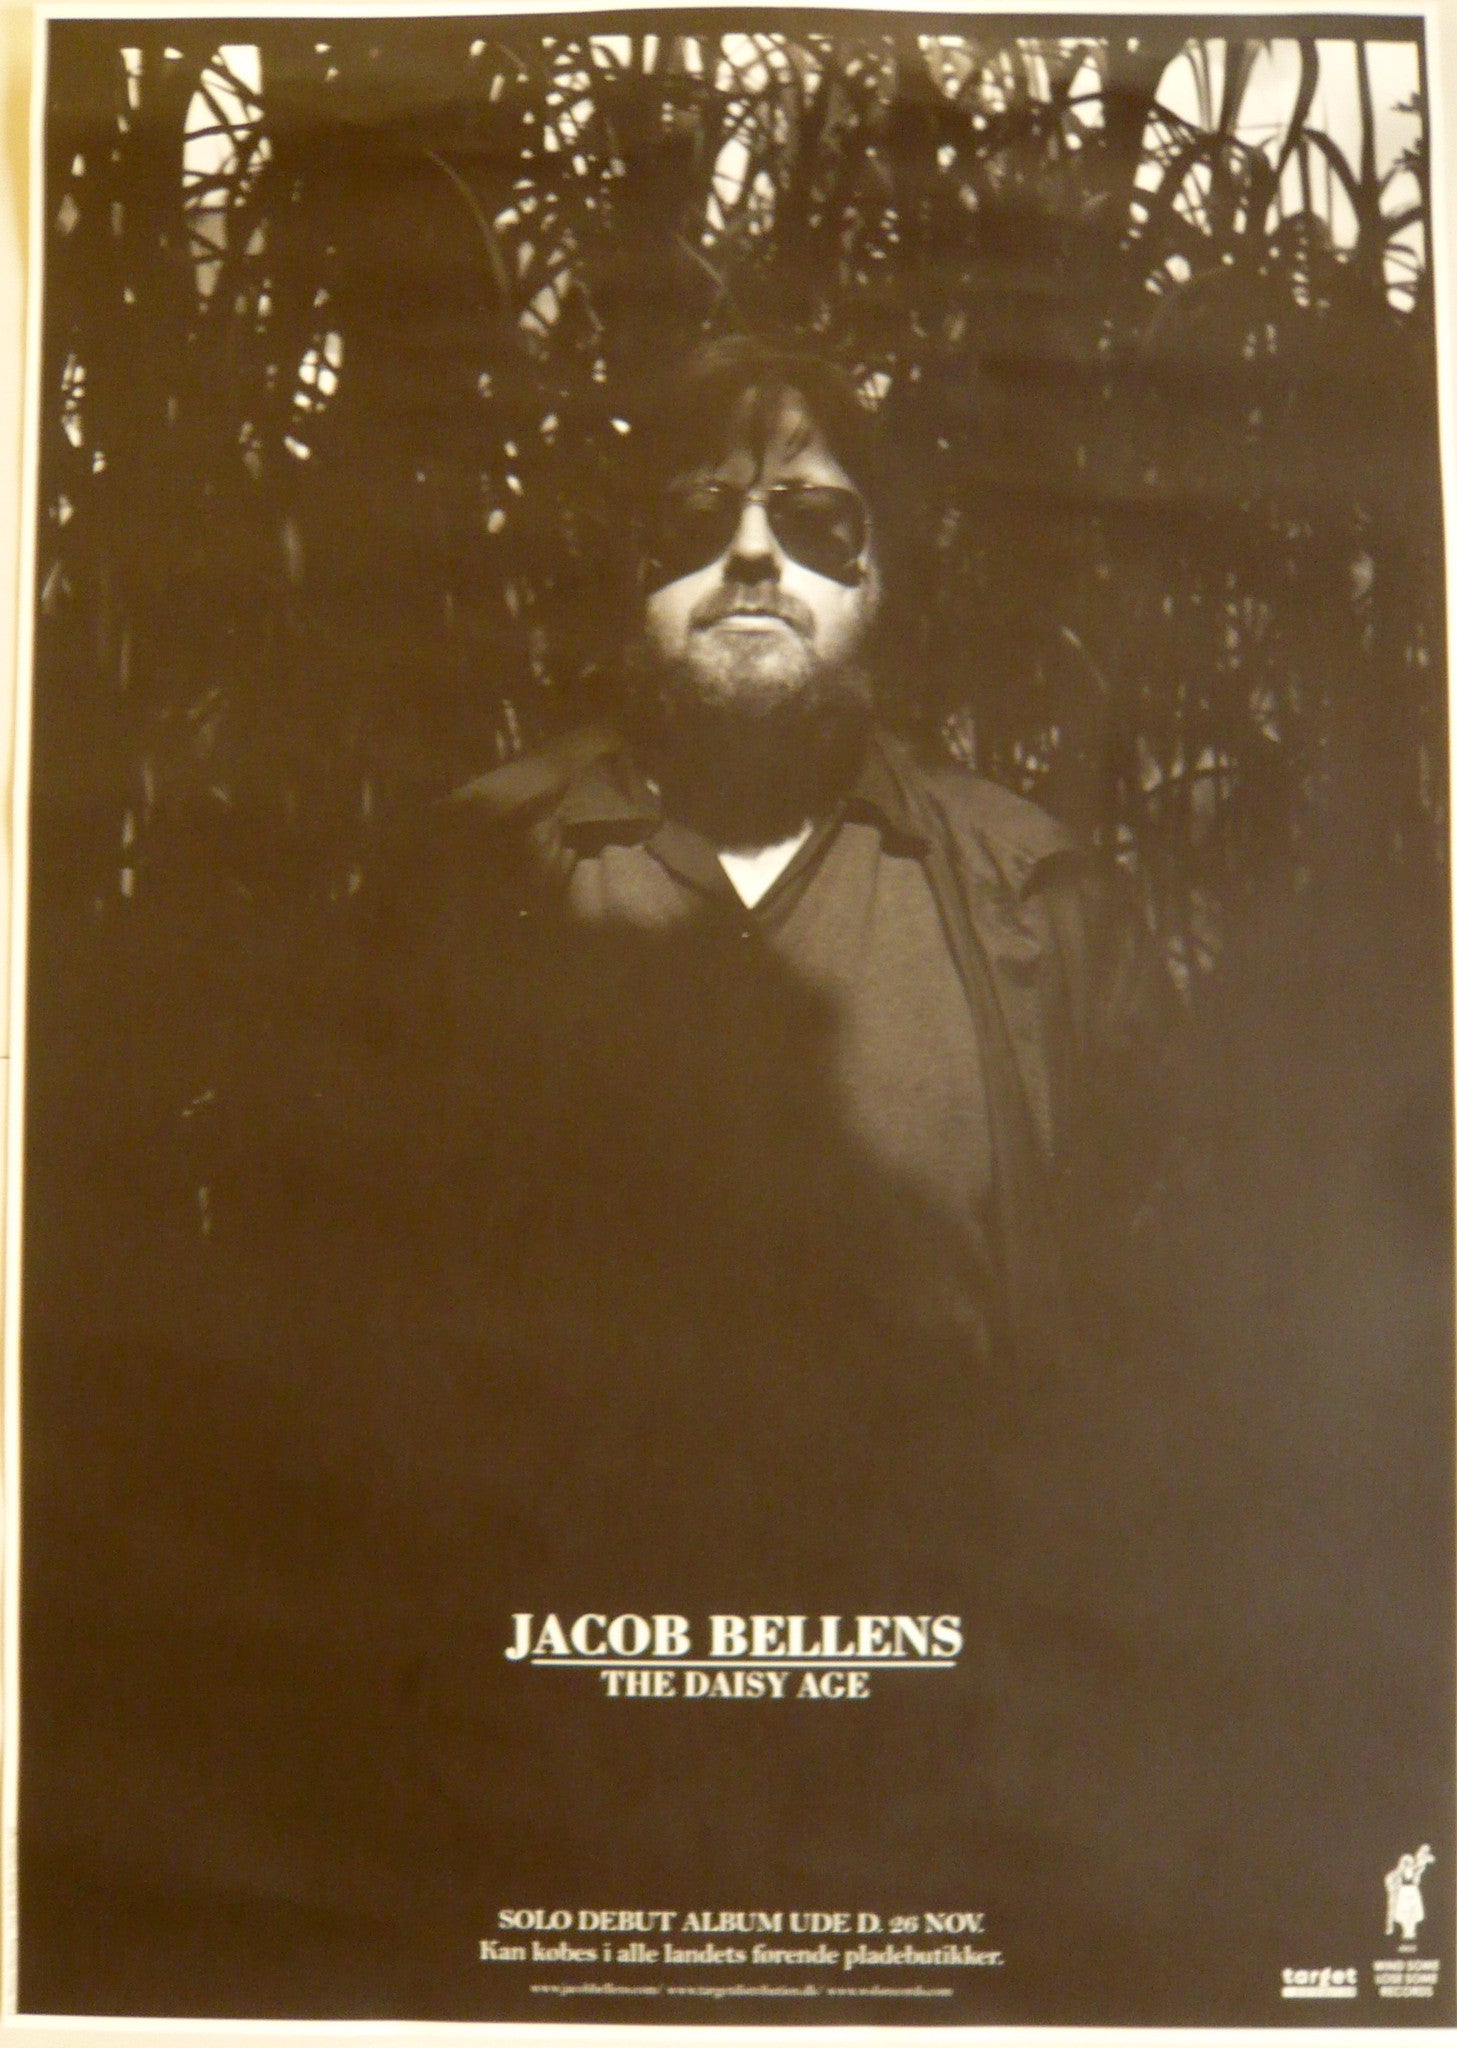 Bellens, Jacob - The Daisy Age - Poster.